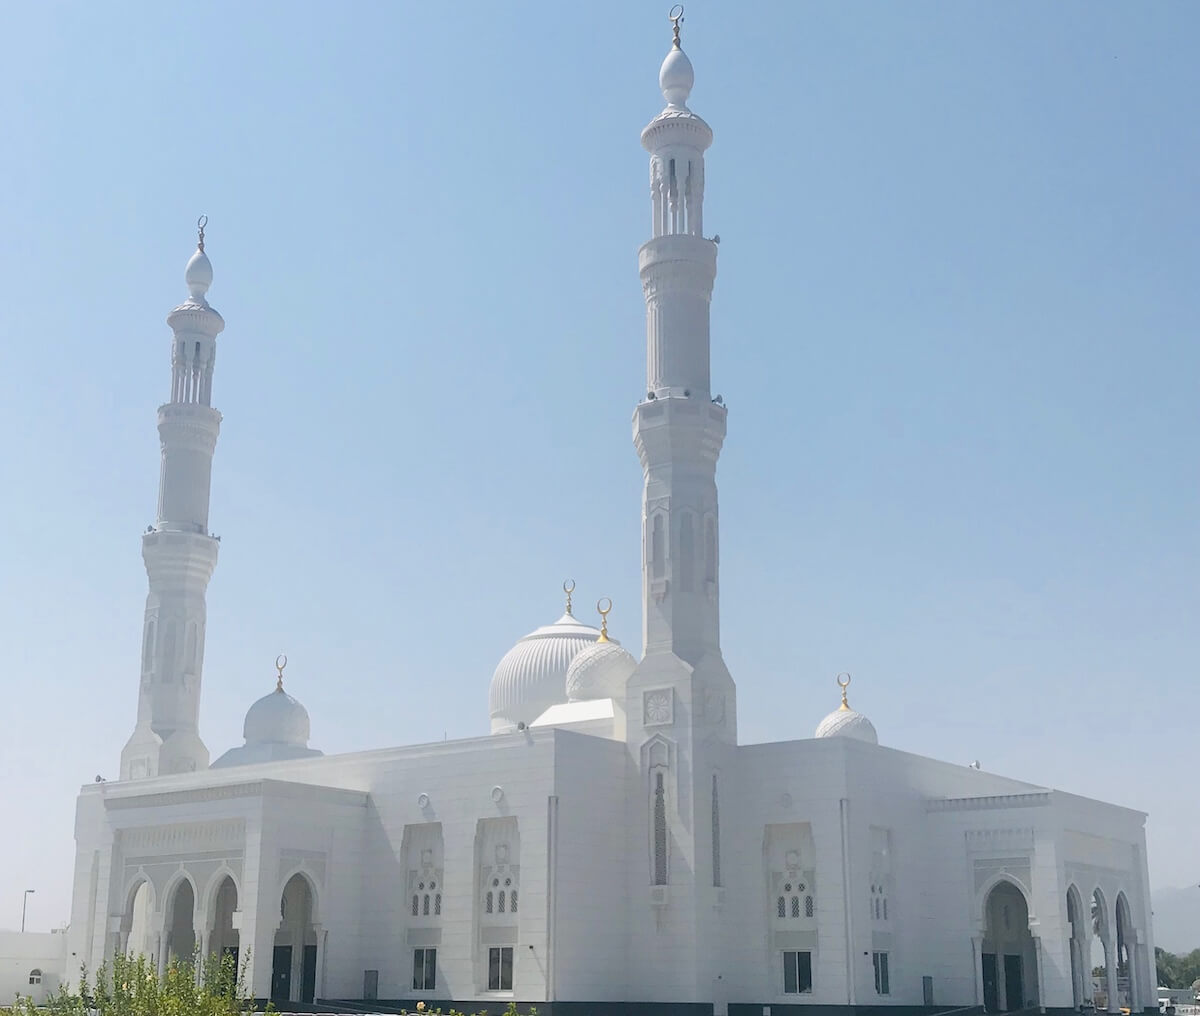 all white mosque with dome and minarets